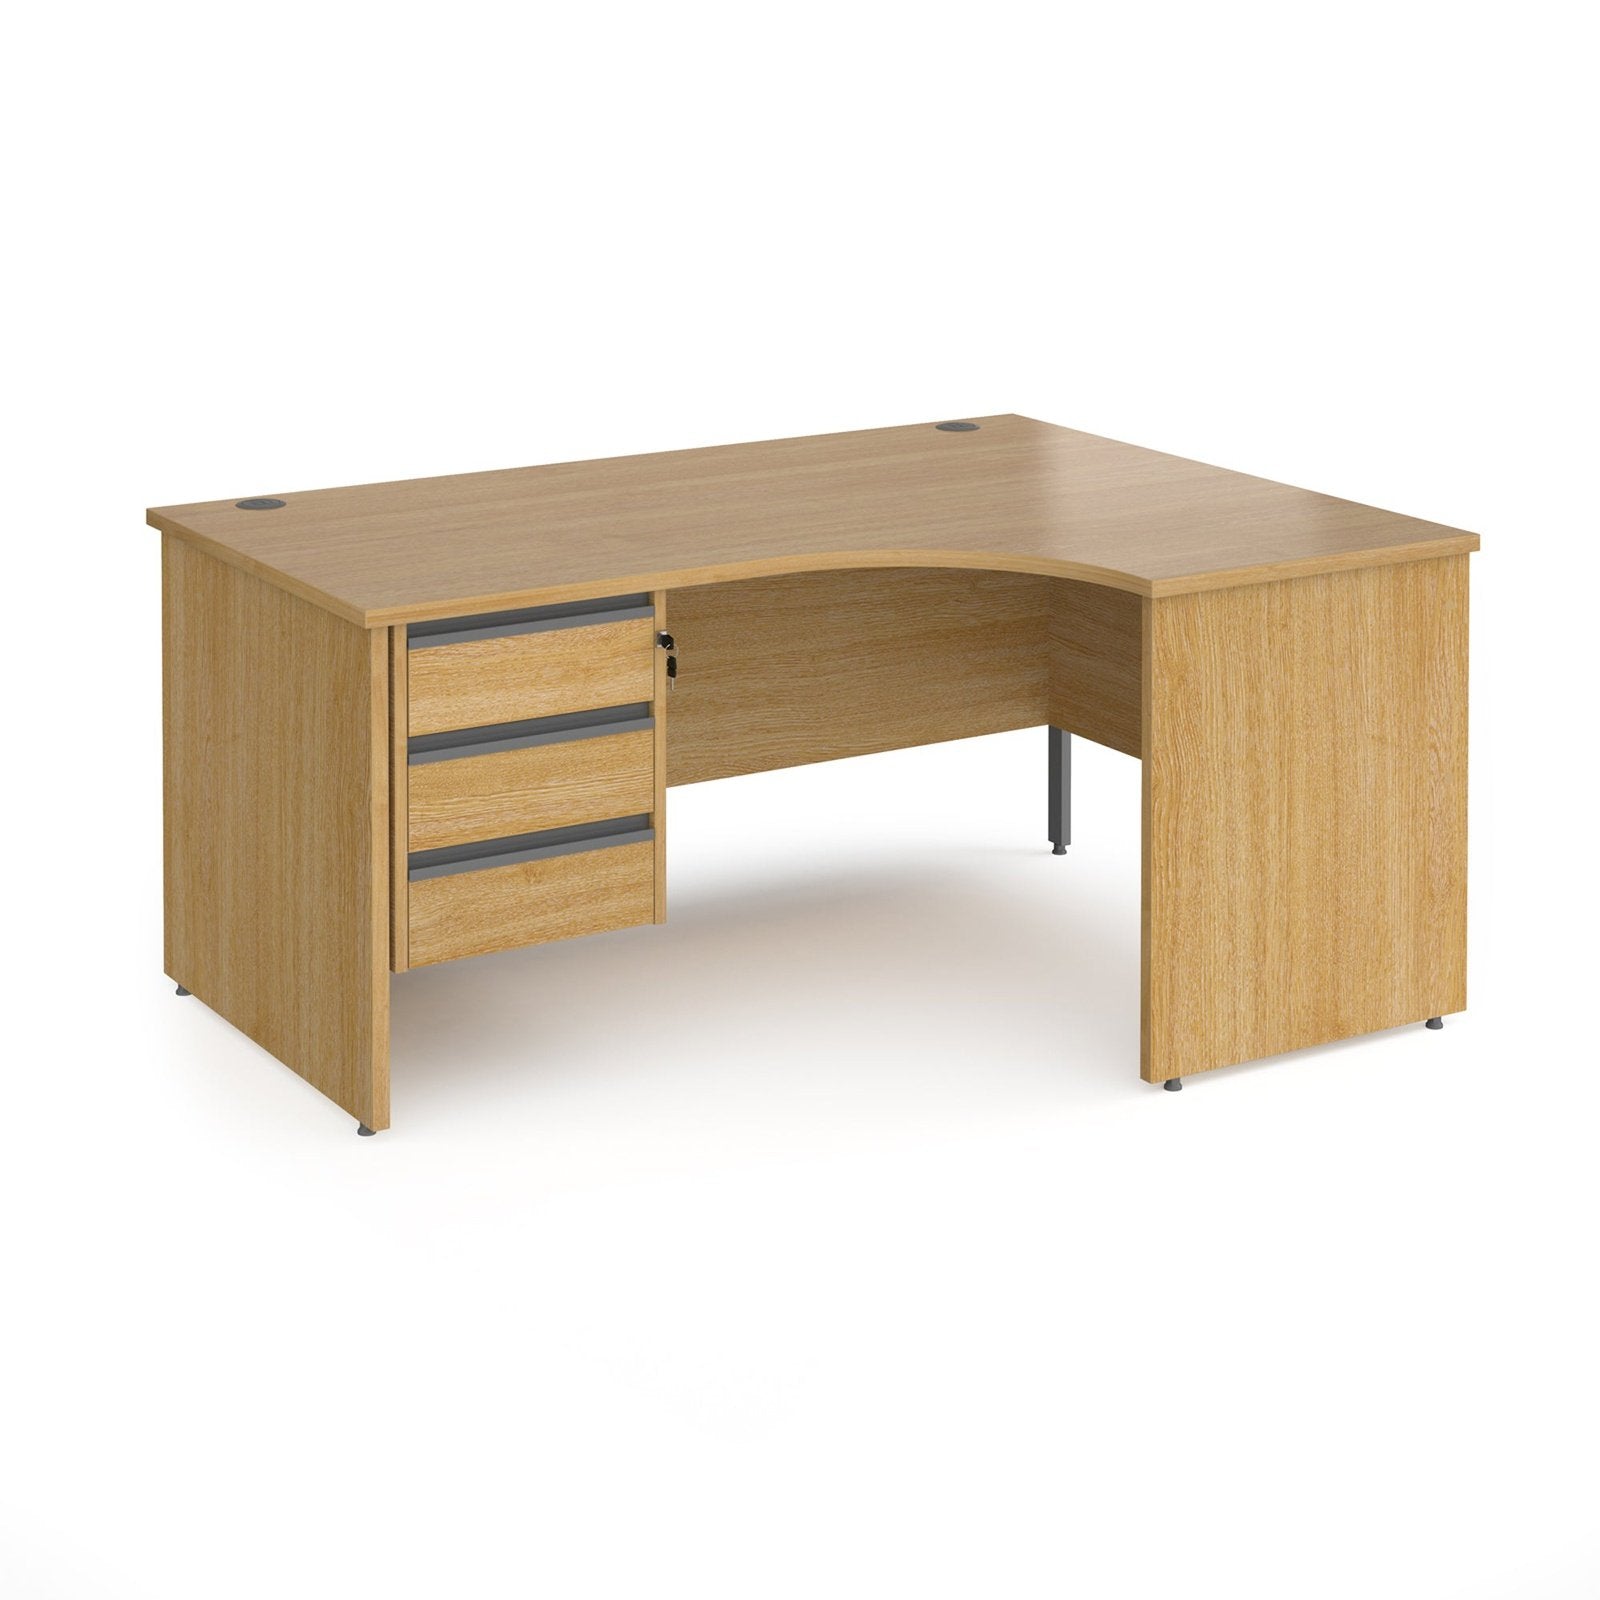 Contract 25 right hand ergonomic desk with 3 drawer pedestal and panel leg - Office Products Online